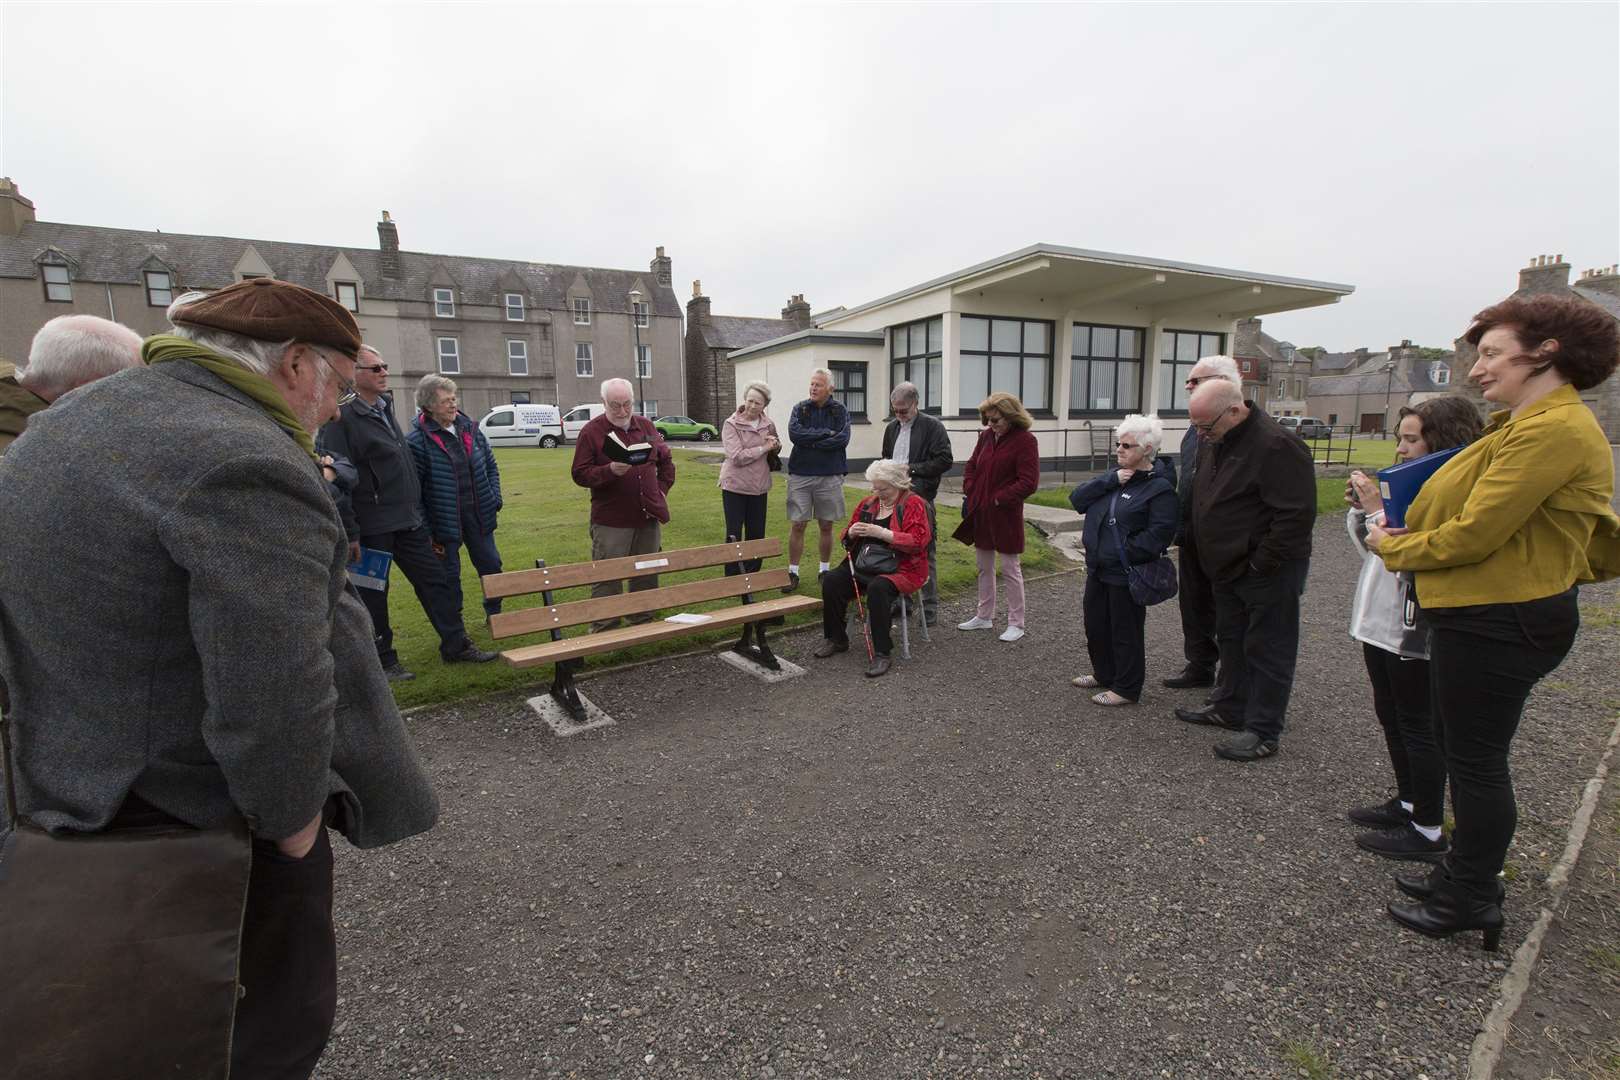 Drew Macleod (centre) reads a poem during the gathering at Wick's Braehead on Saturday afternoon to mark the 10th anniversary of the death of David Morrison. His daughter Glenna Scacchi and granddaughter Marilena, who travelled north for the ceremony, are on the right. Picture: Robert MacDonald / Northern Studios